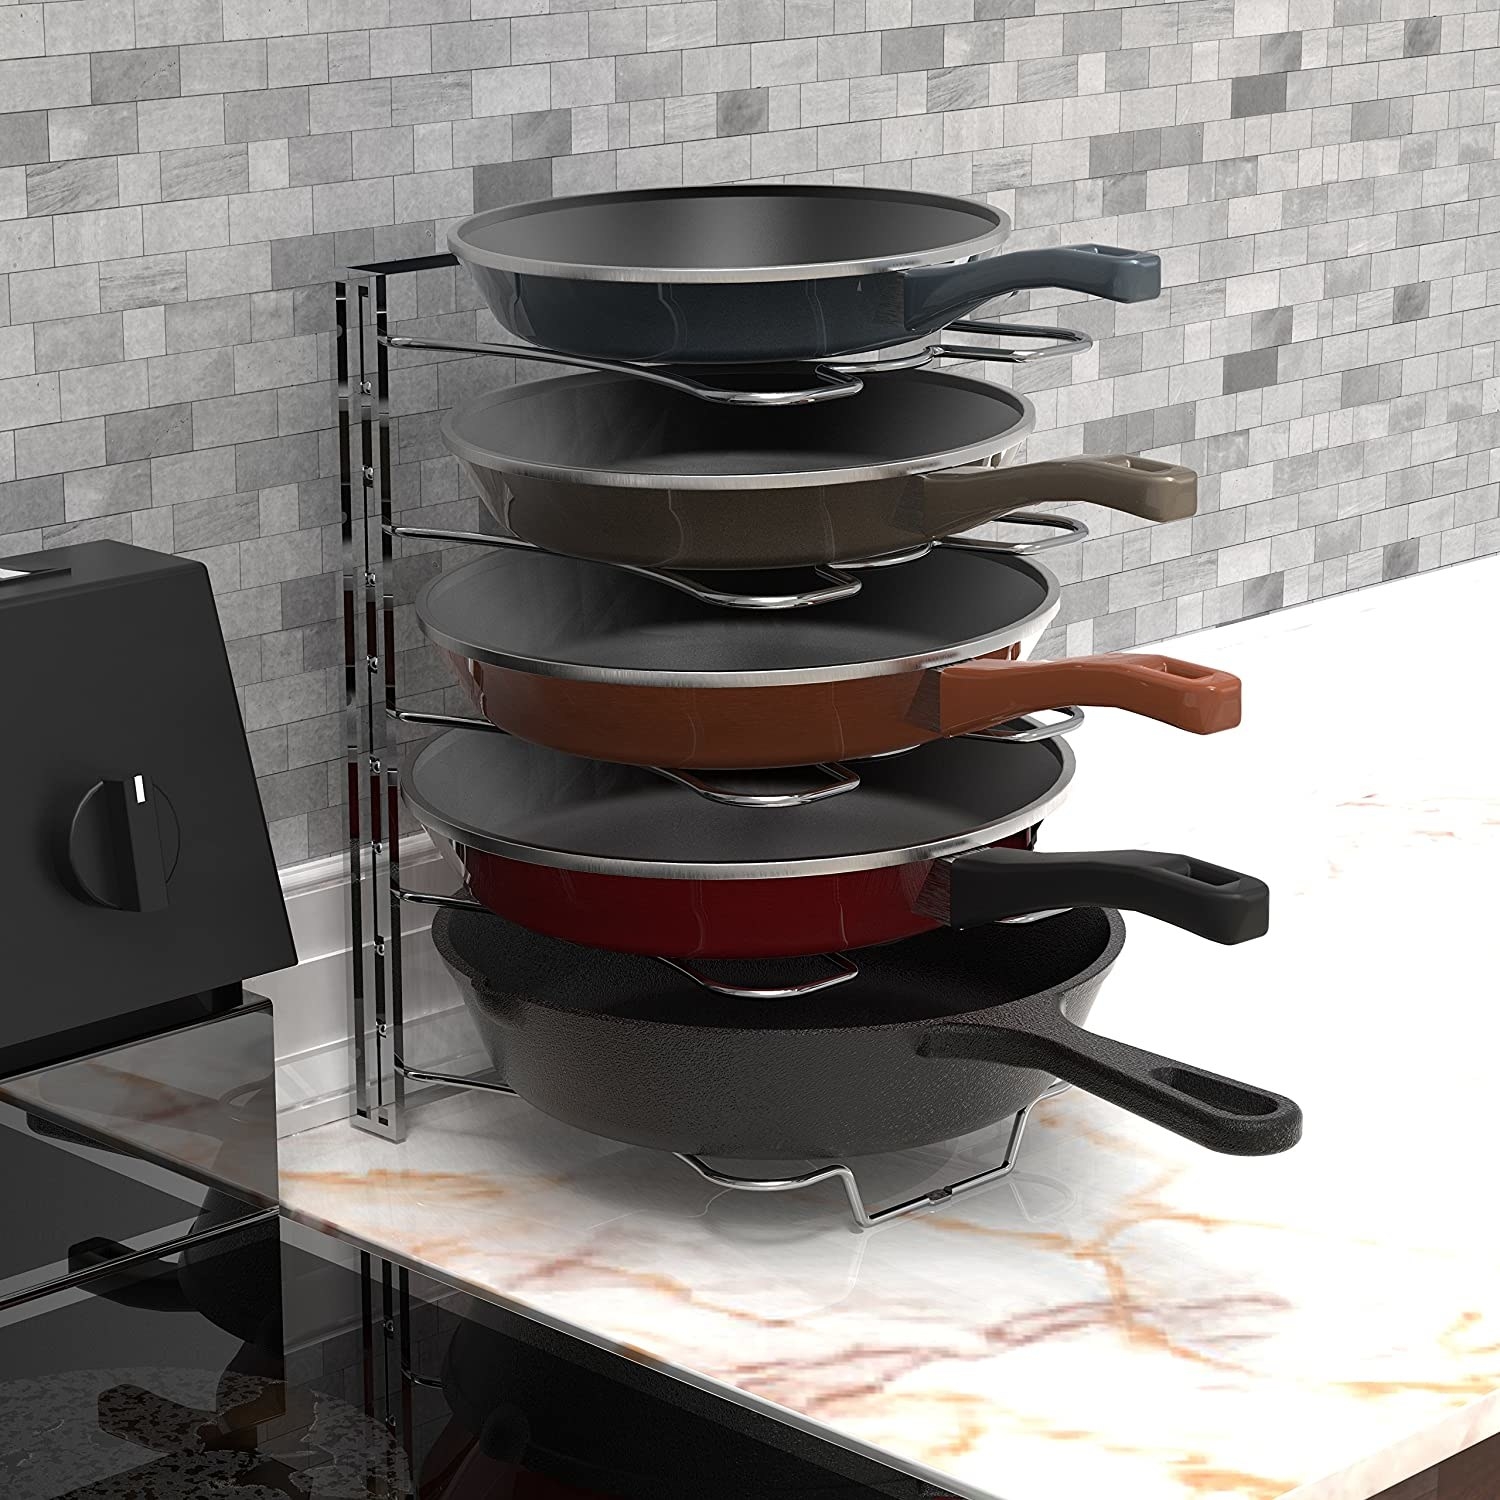 A pot and pan organizer filled with pots and pans on a countertop